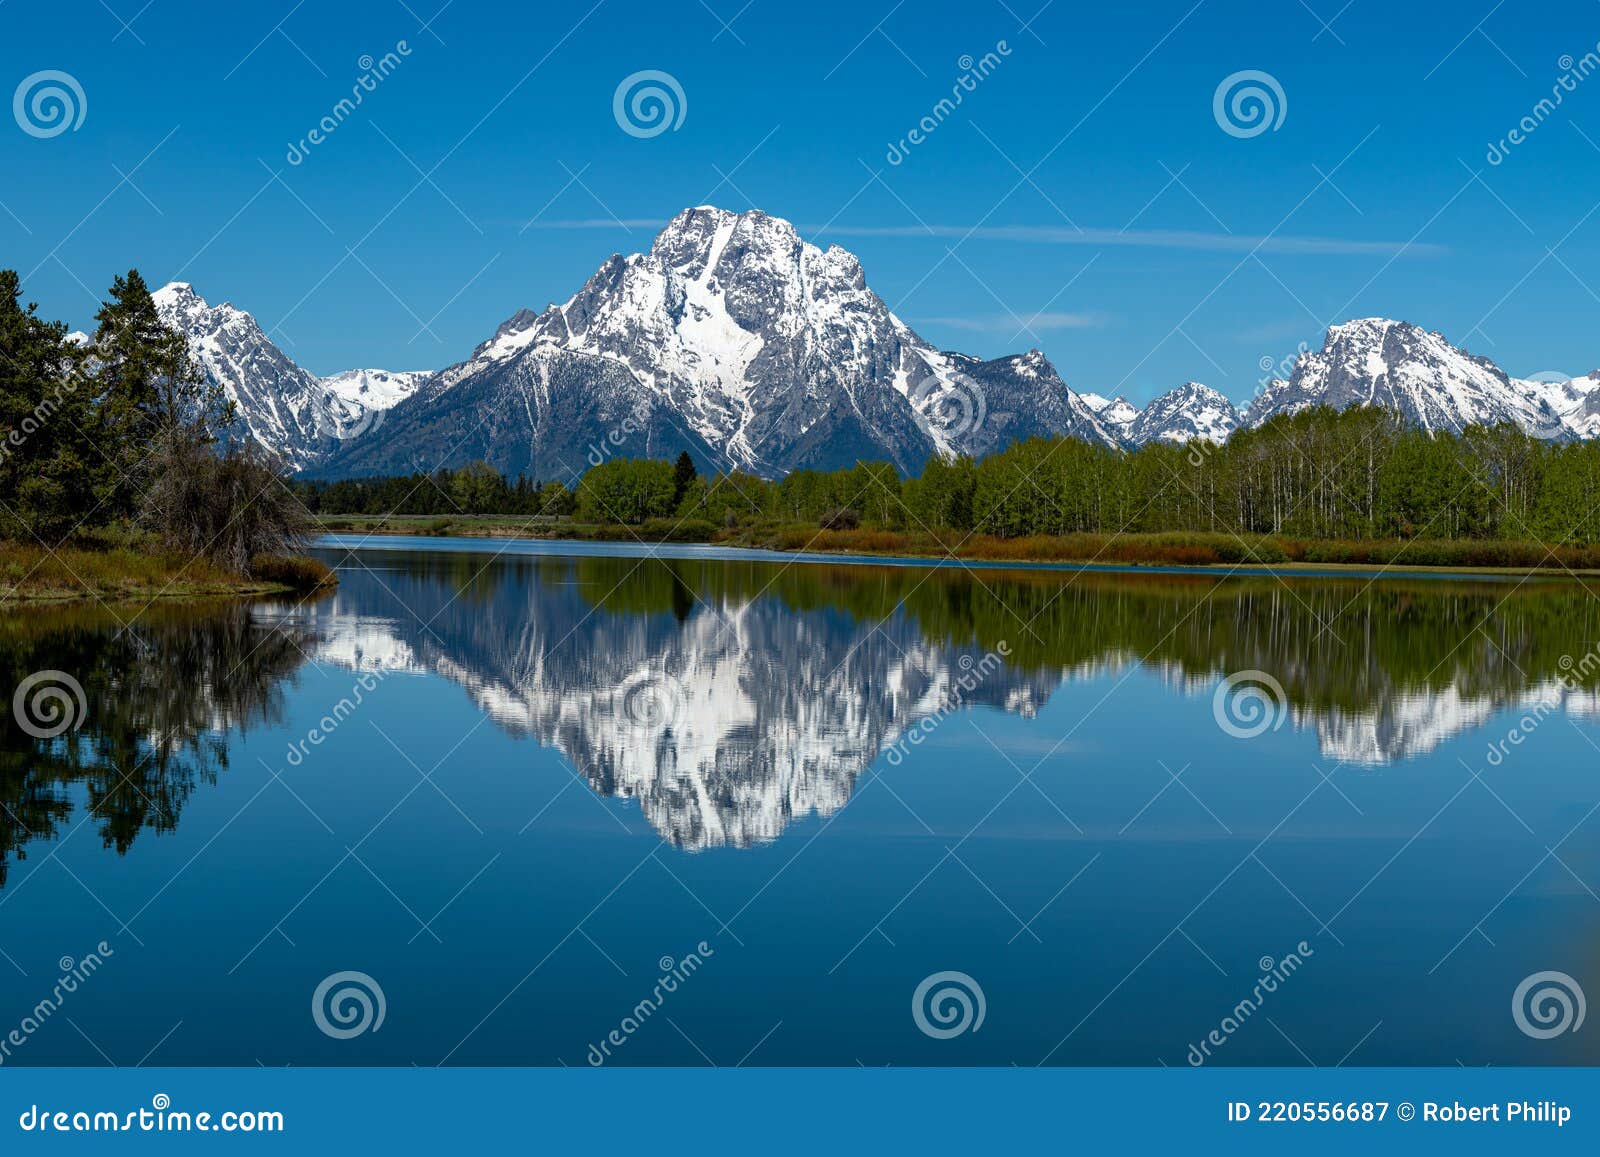 panoramic of the snake river at the oxbow bend along u.s. highway 26